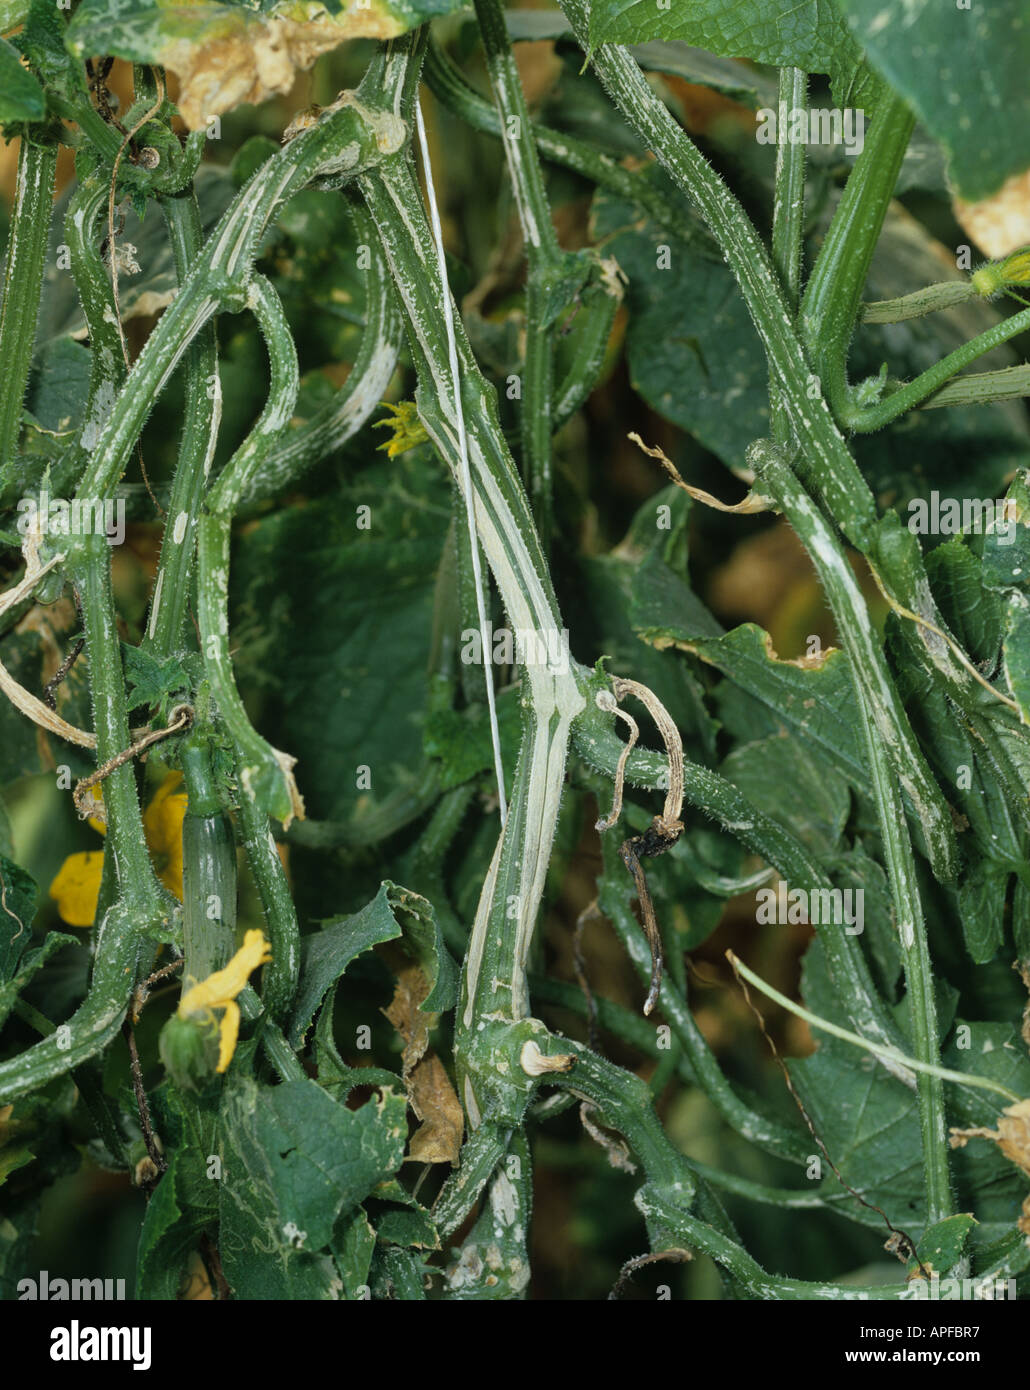 Phomopsis Phomopsis sclerotioides lesions on a cucumber stem Stock Photo